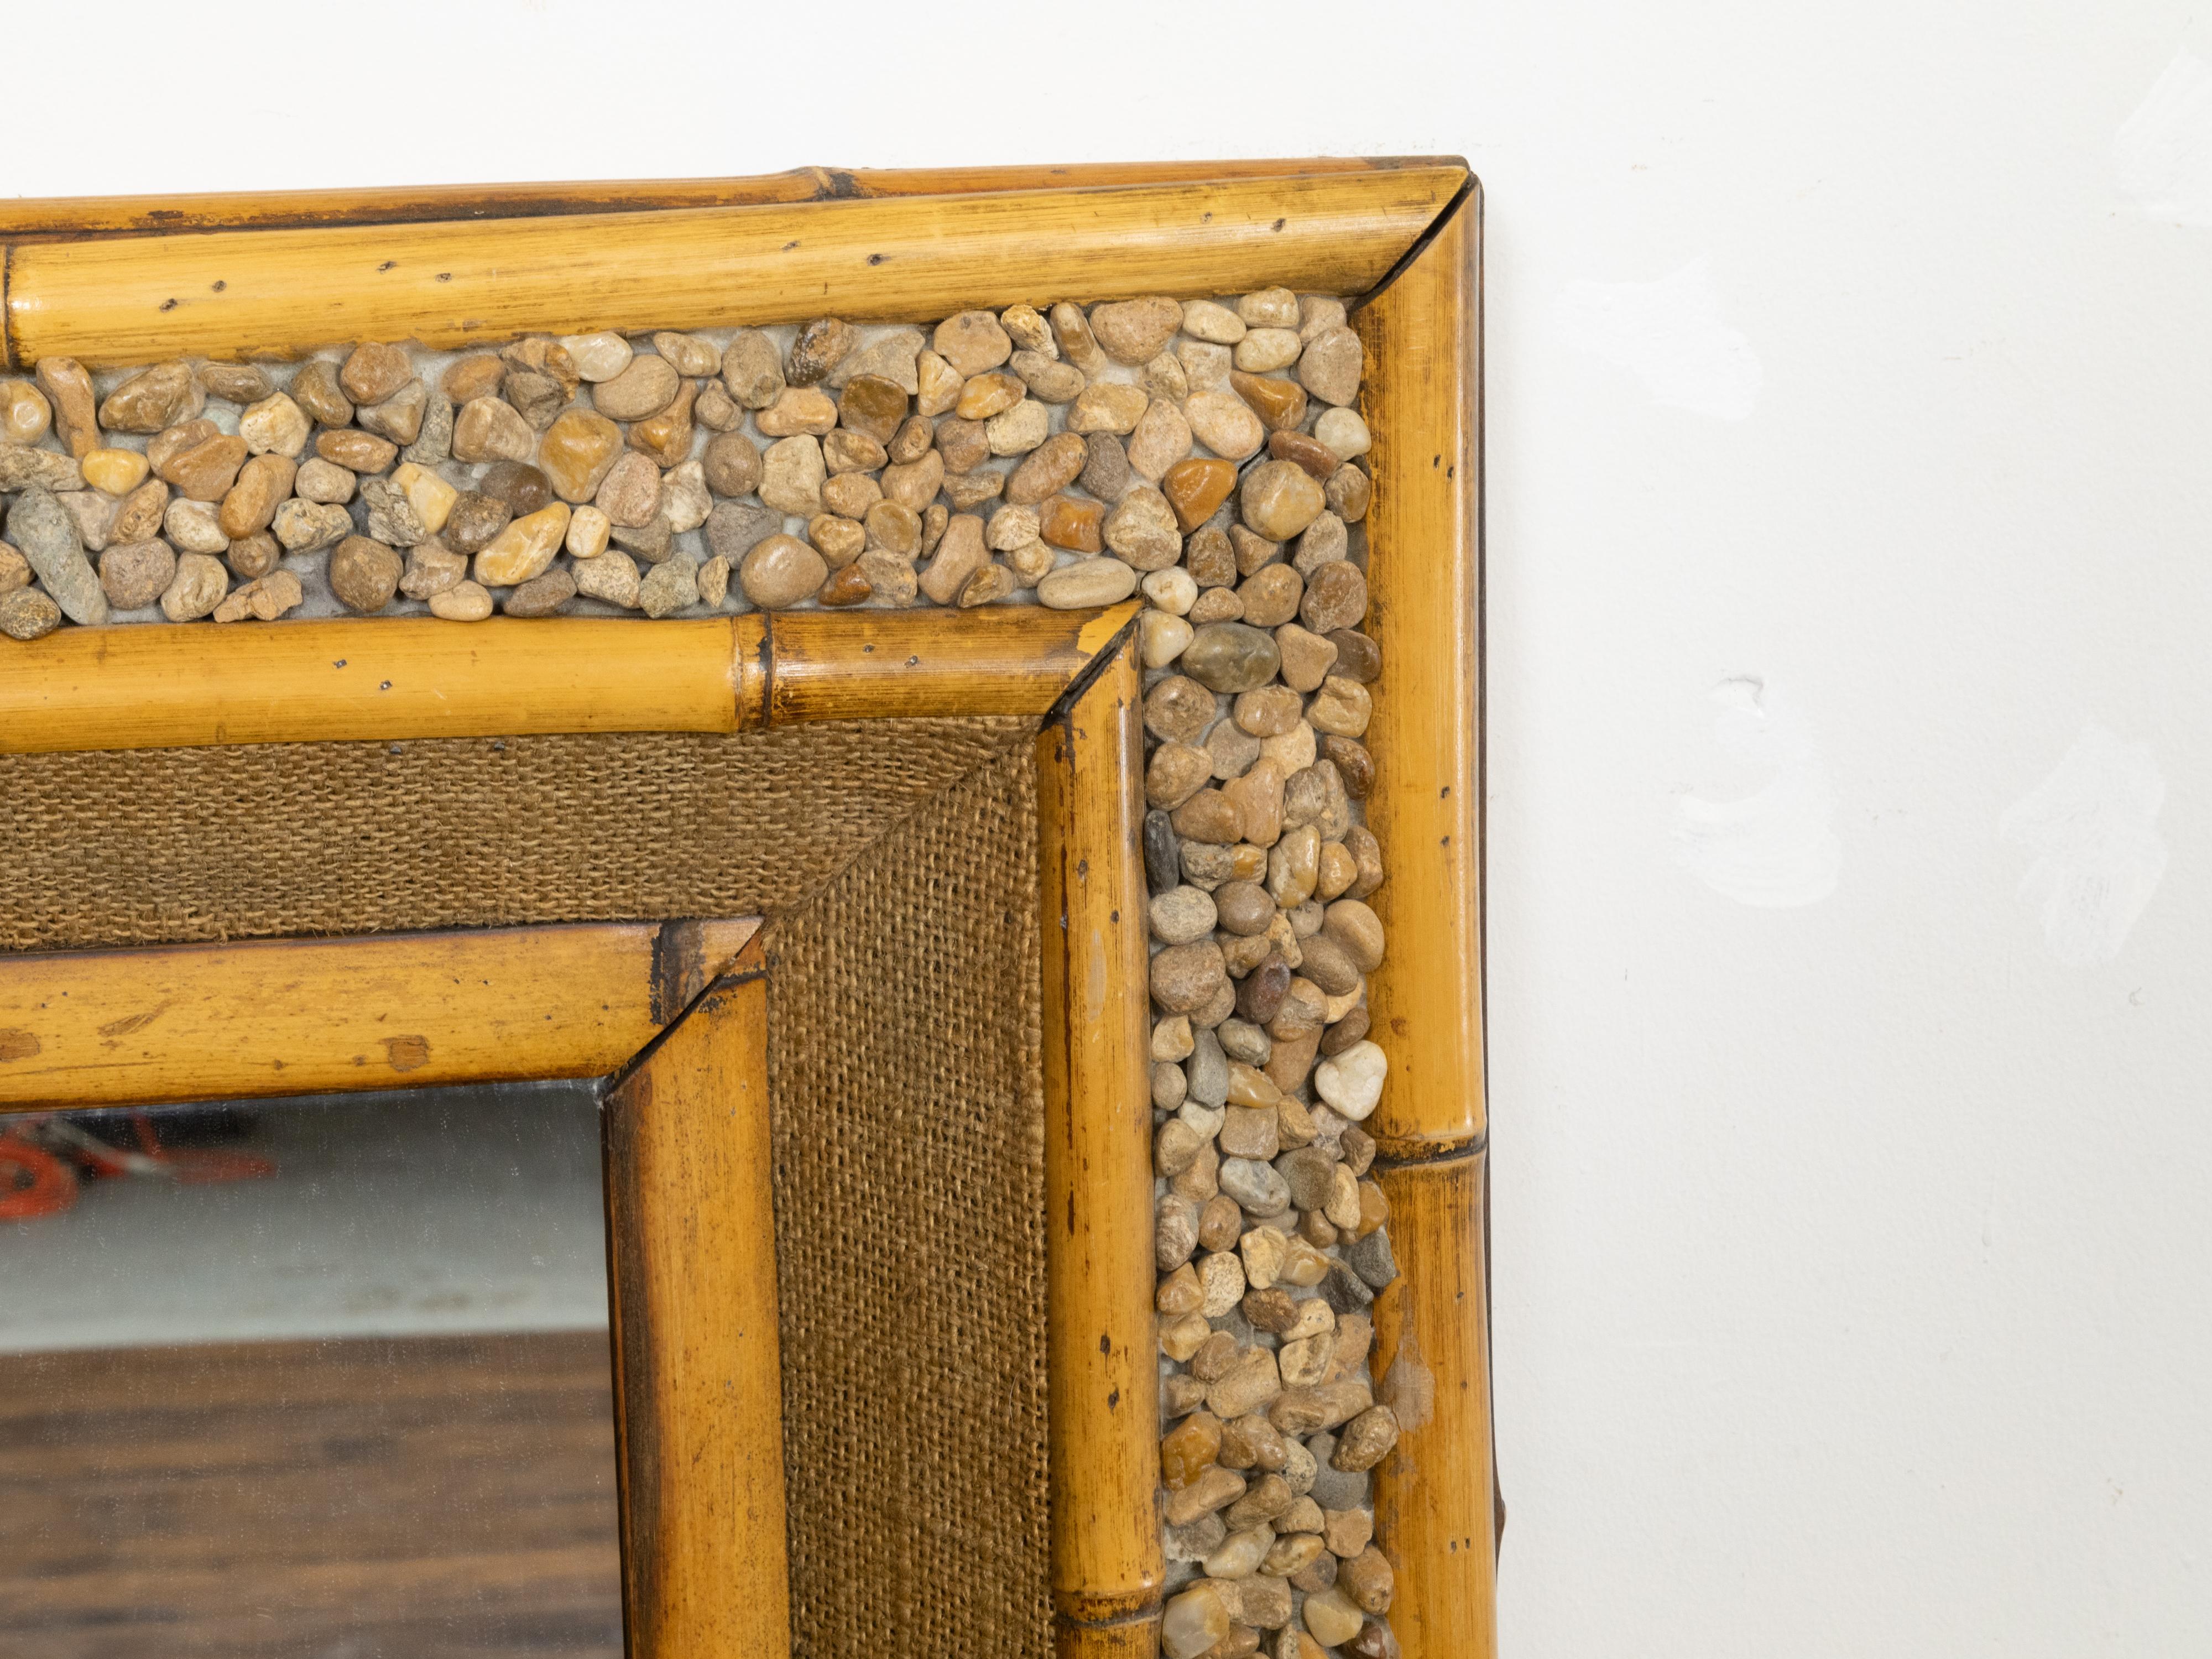 English Bamboo, Rocks and Burlap Rectangular Mirror from the Mid-Century Period For Sale 2